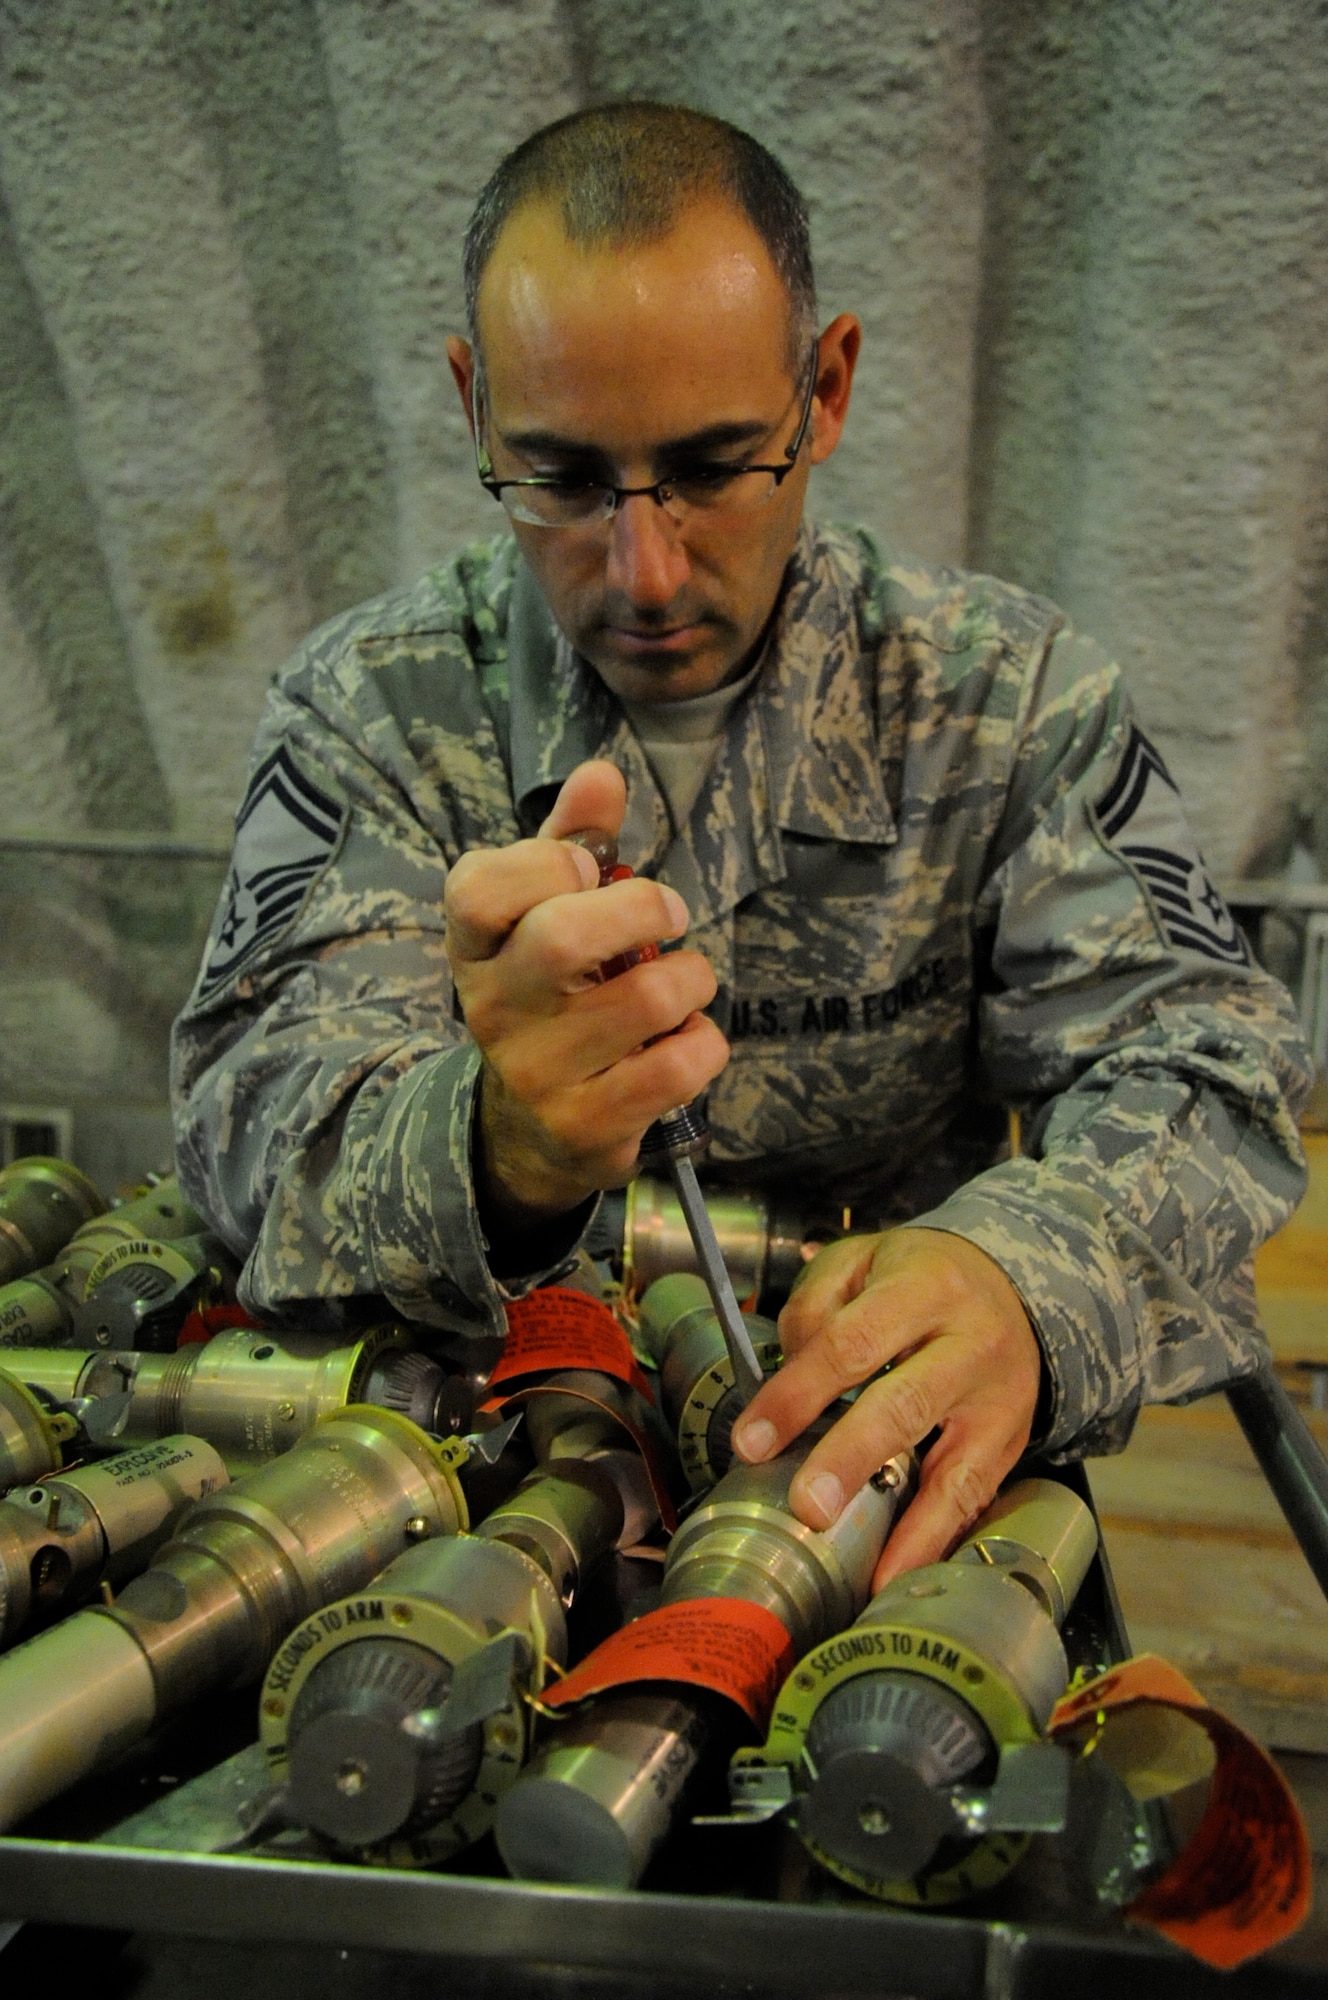 EIELSON AIR FORCE BASE, Alaska -- Master Sgt. David Paladino, munitions technician, builds bombs, July 16, 2012, to be used during a live-employment exercise here. Paladino, along with approximately 300 other reservists assigned to the 442nd Fighter Wing, Whiteman Air Force Base, Mo., are deployed here for training. The 442nd FW is an A-10 Thunderbolt II Air Force Reserve unit at Whiteman Air Force Base, Mo. (U.S. Air Force photo/Staff Sgt. Danielle Johnston)